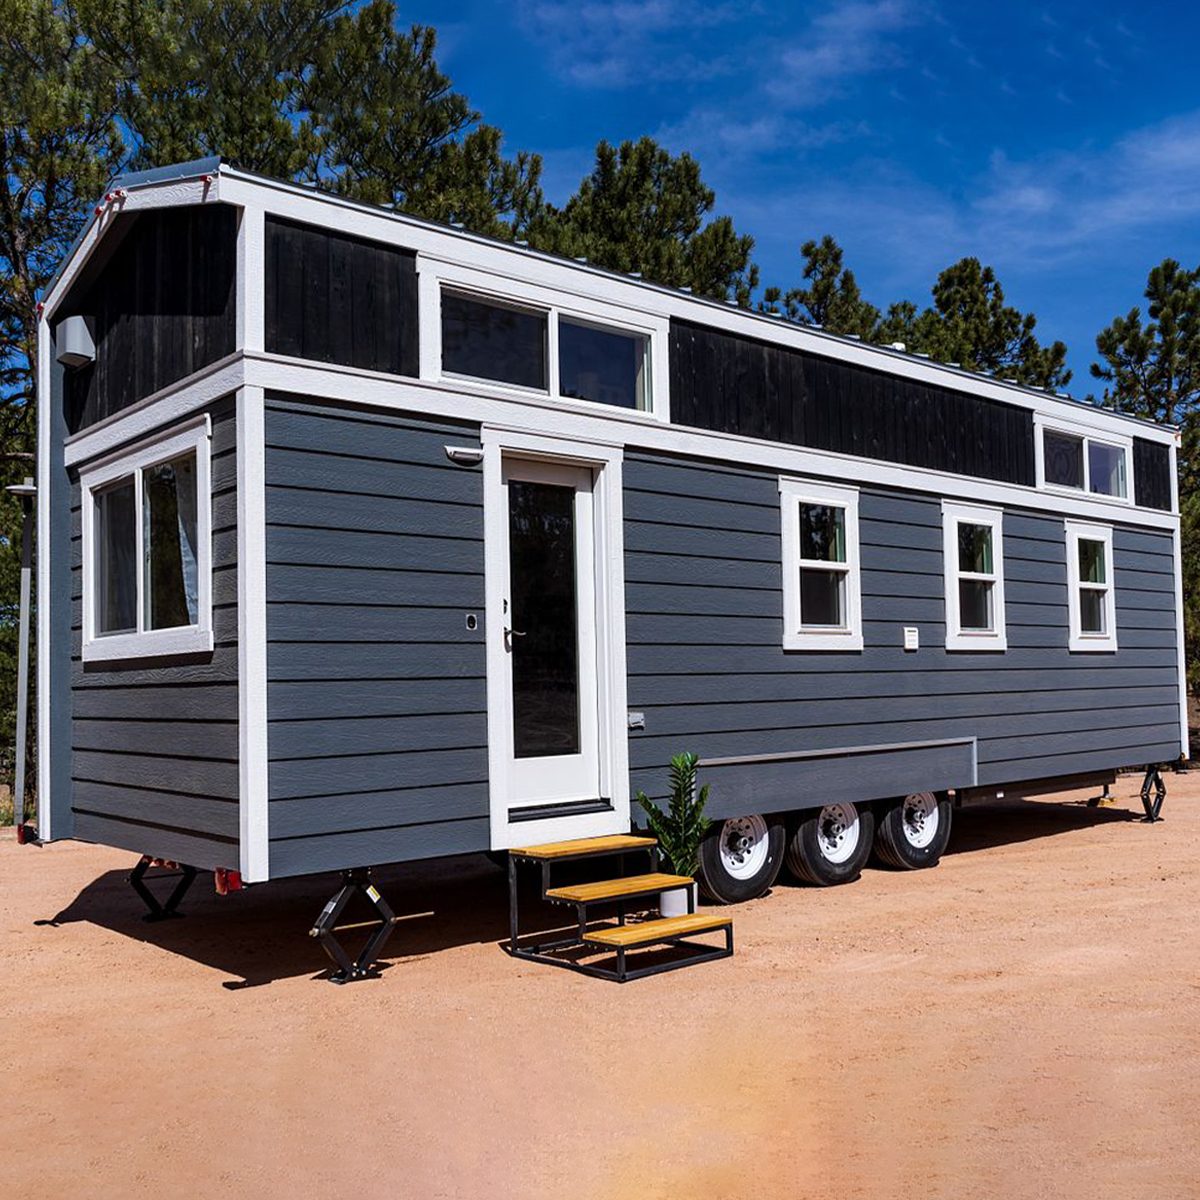 https://www.familyhandyman.com/wp-content/uploads/2023/07/If-Youre-Serious-About-Tiny-Home-Living-This-Company-Customizes-the-Home-of-Your-Dreams2_FT_via-amazon.com_.jpg